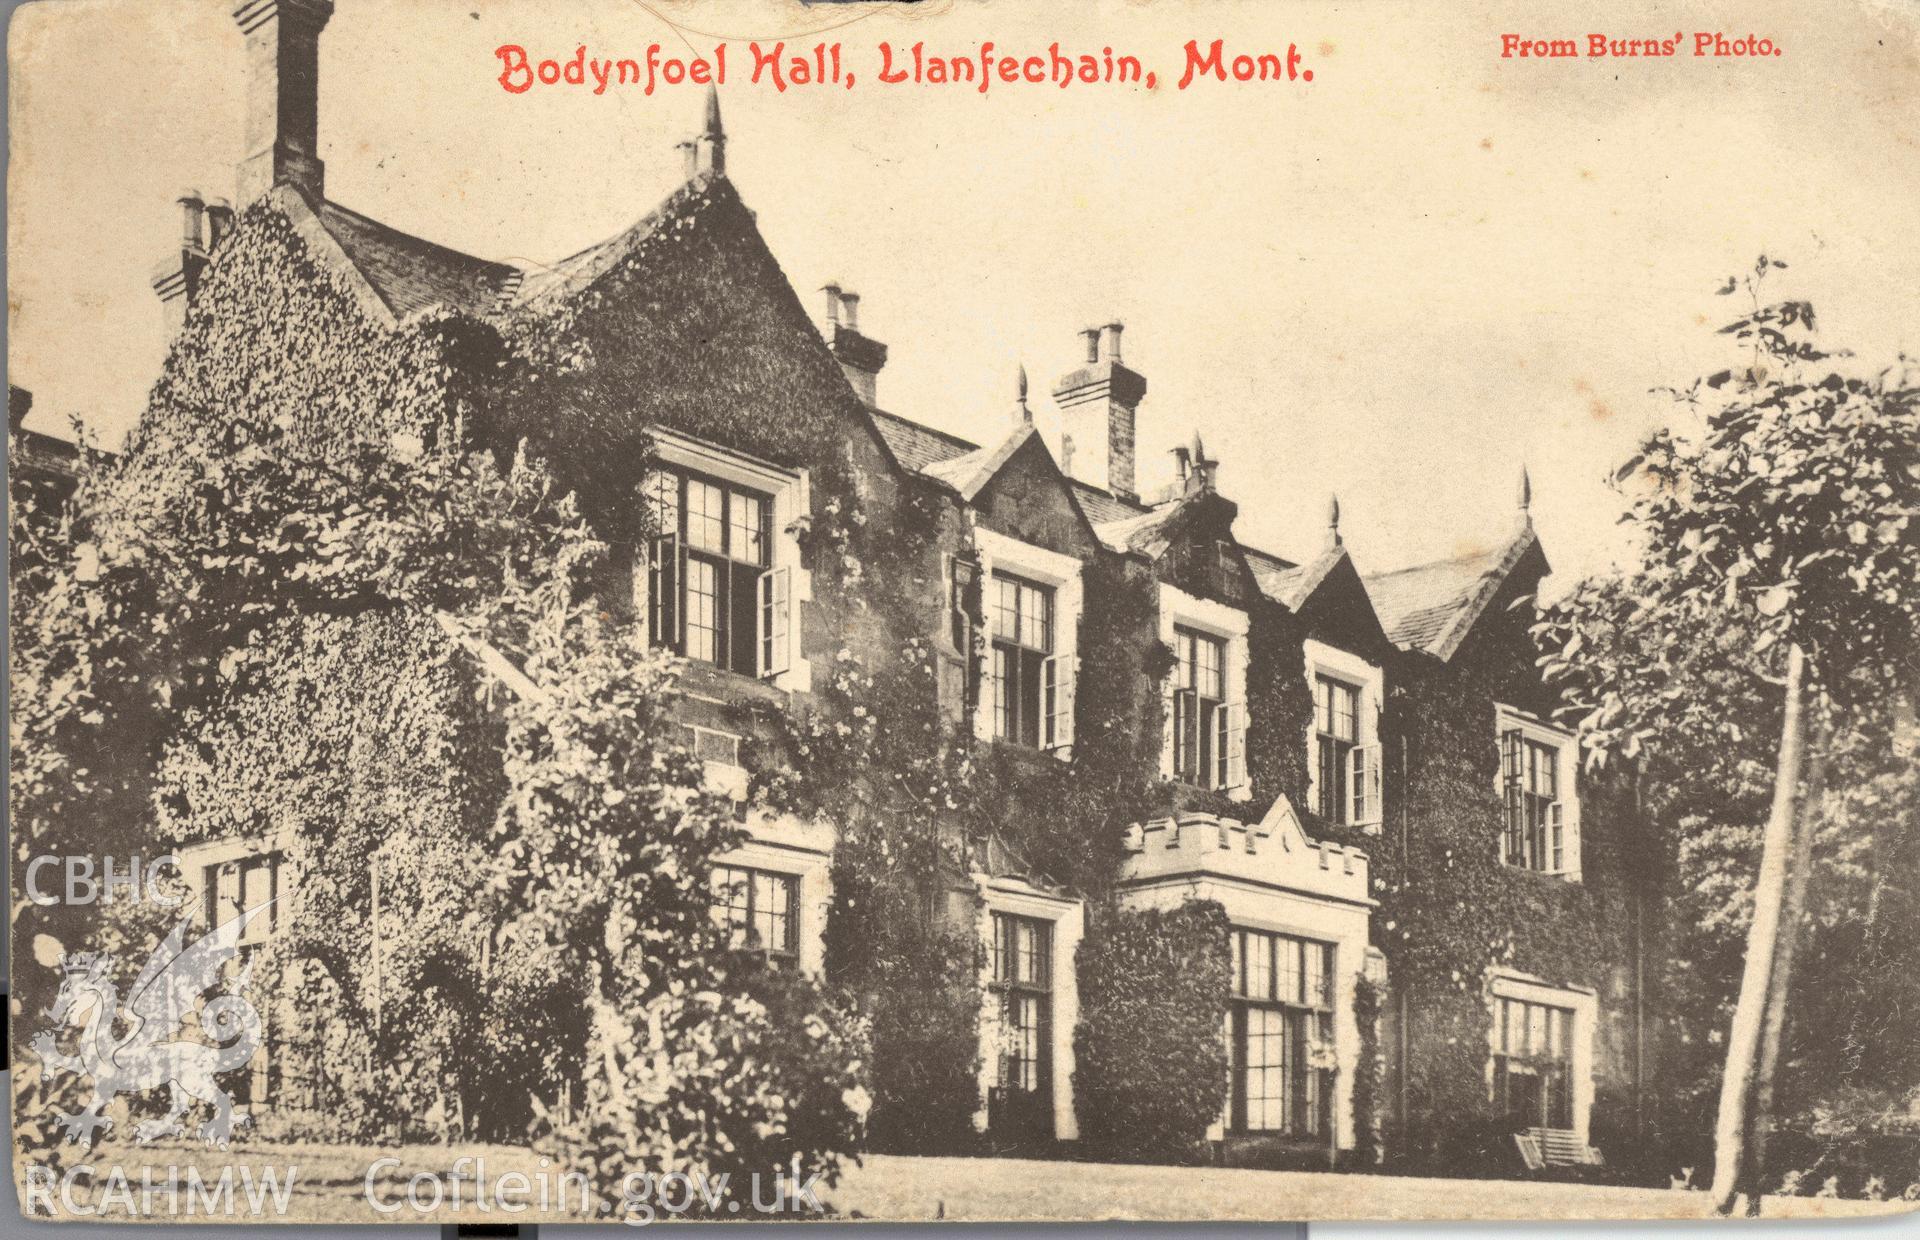 Digitised postcard image of Bodynfoel Hall, Llanfechain, D.P. Edwards. Produced by Parks and Gardens Data Services, from an original item in the Peter Davis Collection at Parks and Gardens UK. We hold only web-resolution images of this collection, suitable for viewing on screen and for research purposes only. We do not hold the original images, or publication quality scans.